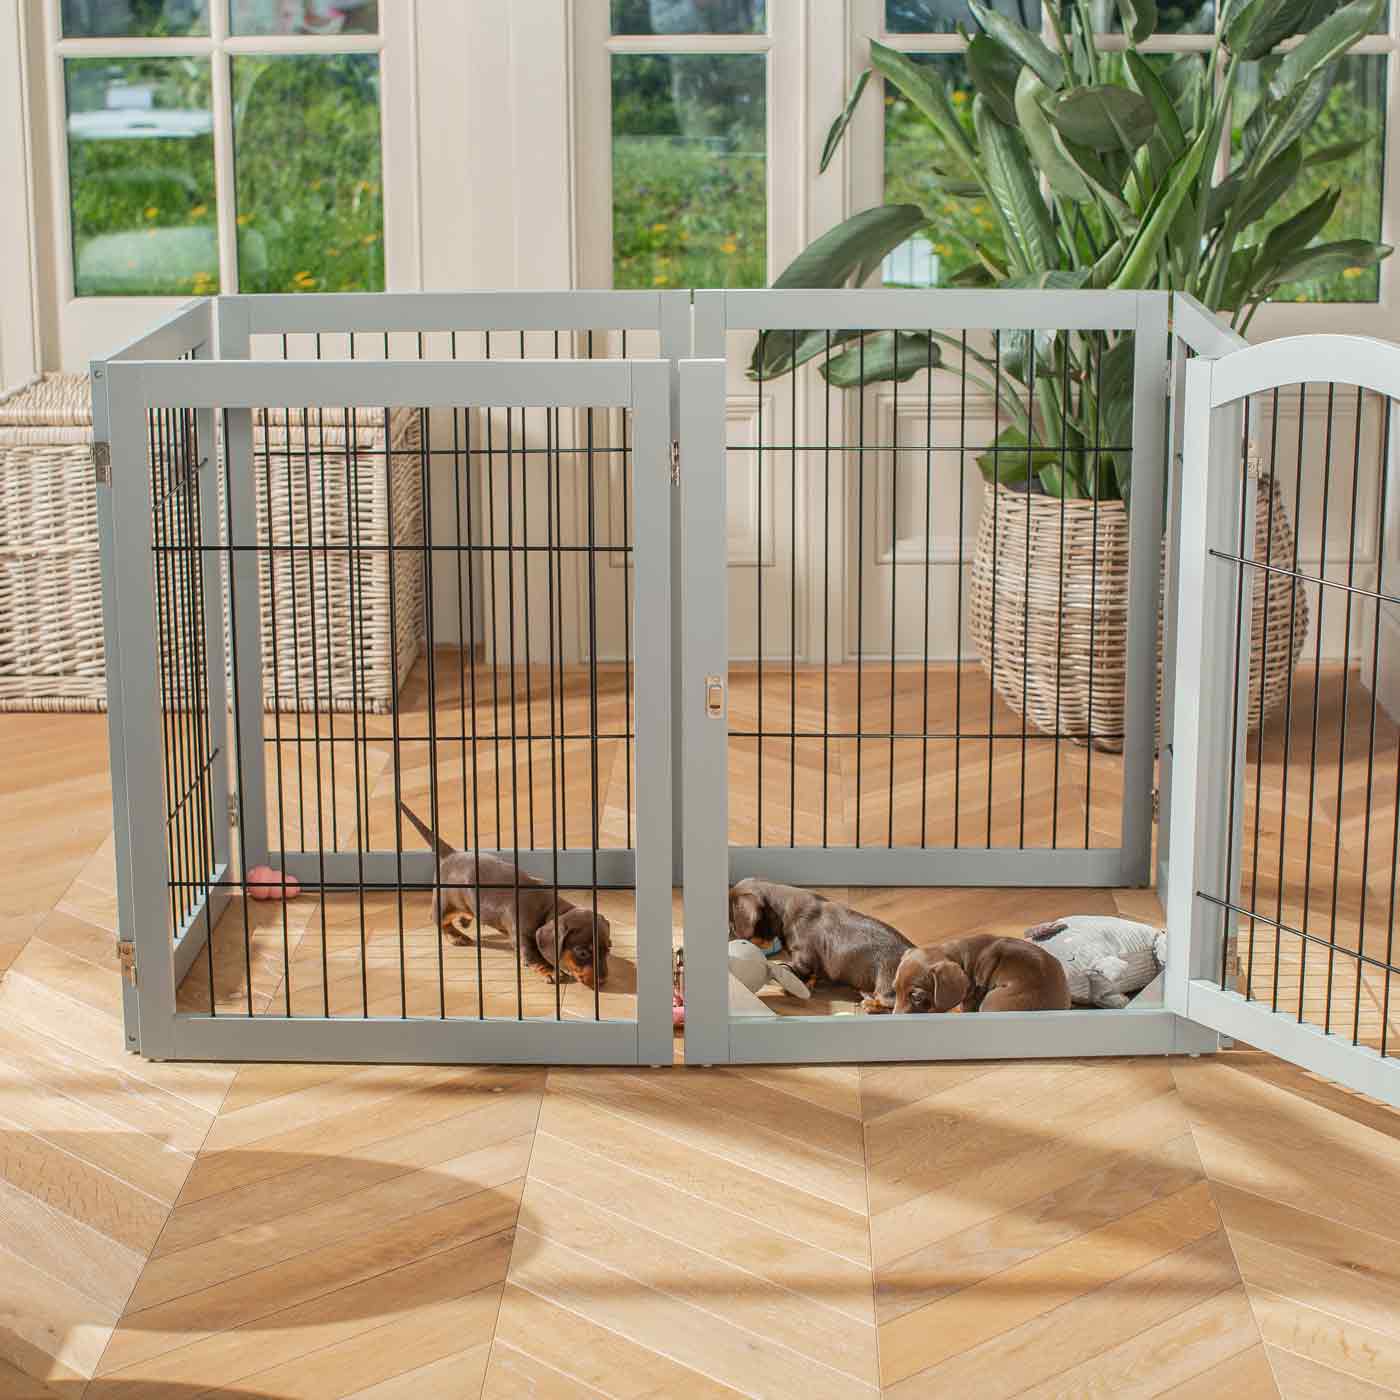 Ensure The Ultimate Puppy Safety with Our Heavy Duty Wooden Puppy Play Pen in Grey or white, Crafted to Take Your Pet Right Through Maturity! Powder Coated to Be Extra Hardwearing! 6 panels that are 80.5cm high! Available To Now at Lords & Labradors